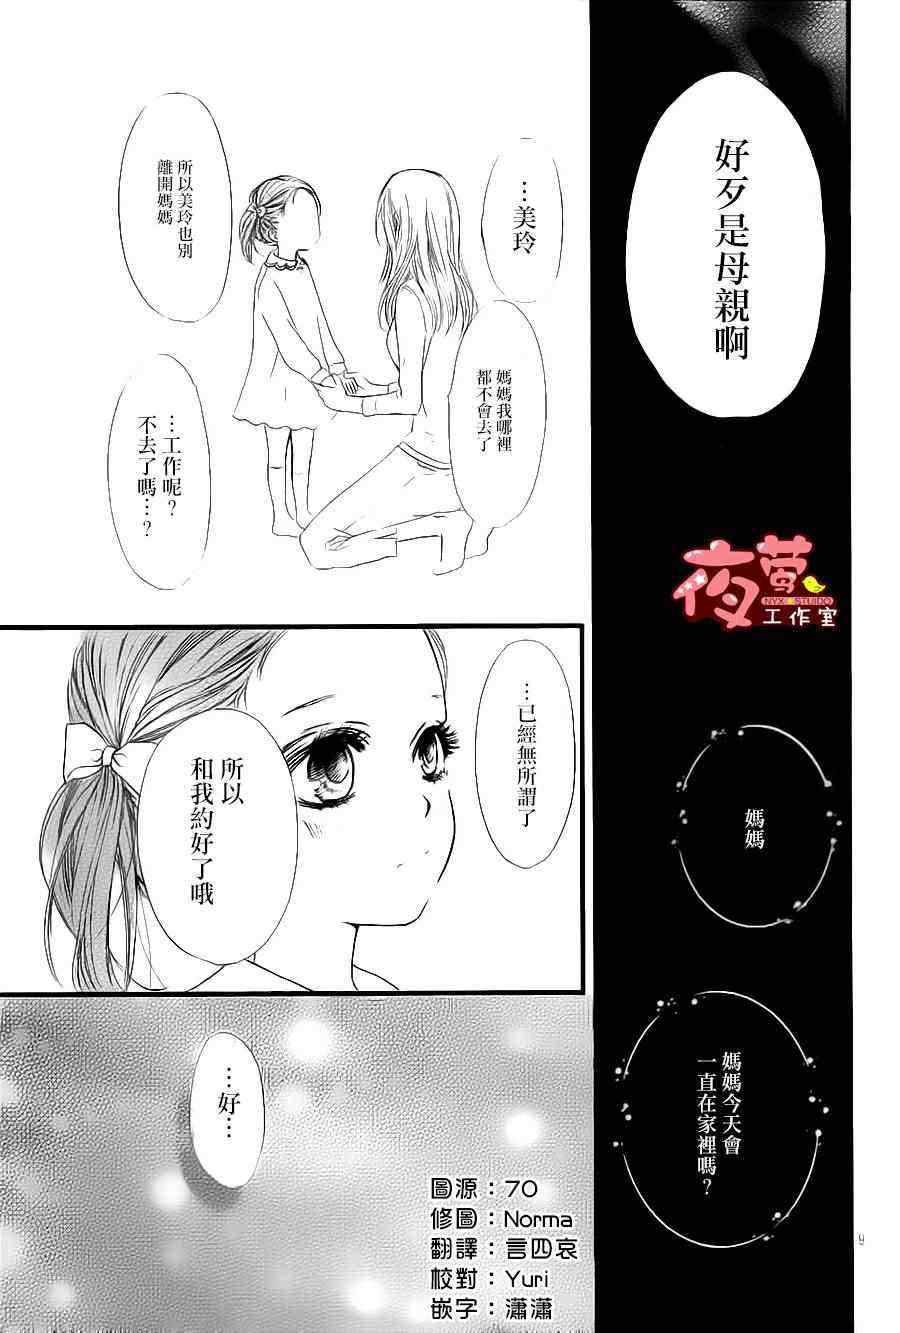 I love you baby - 第27话 - 3